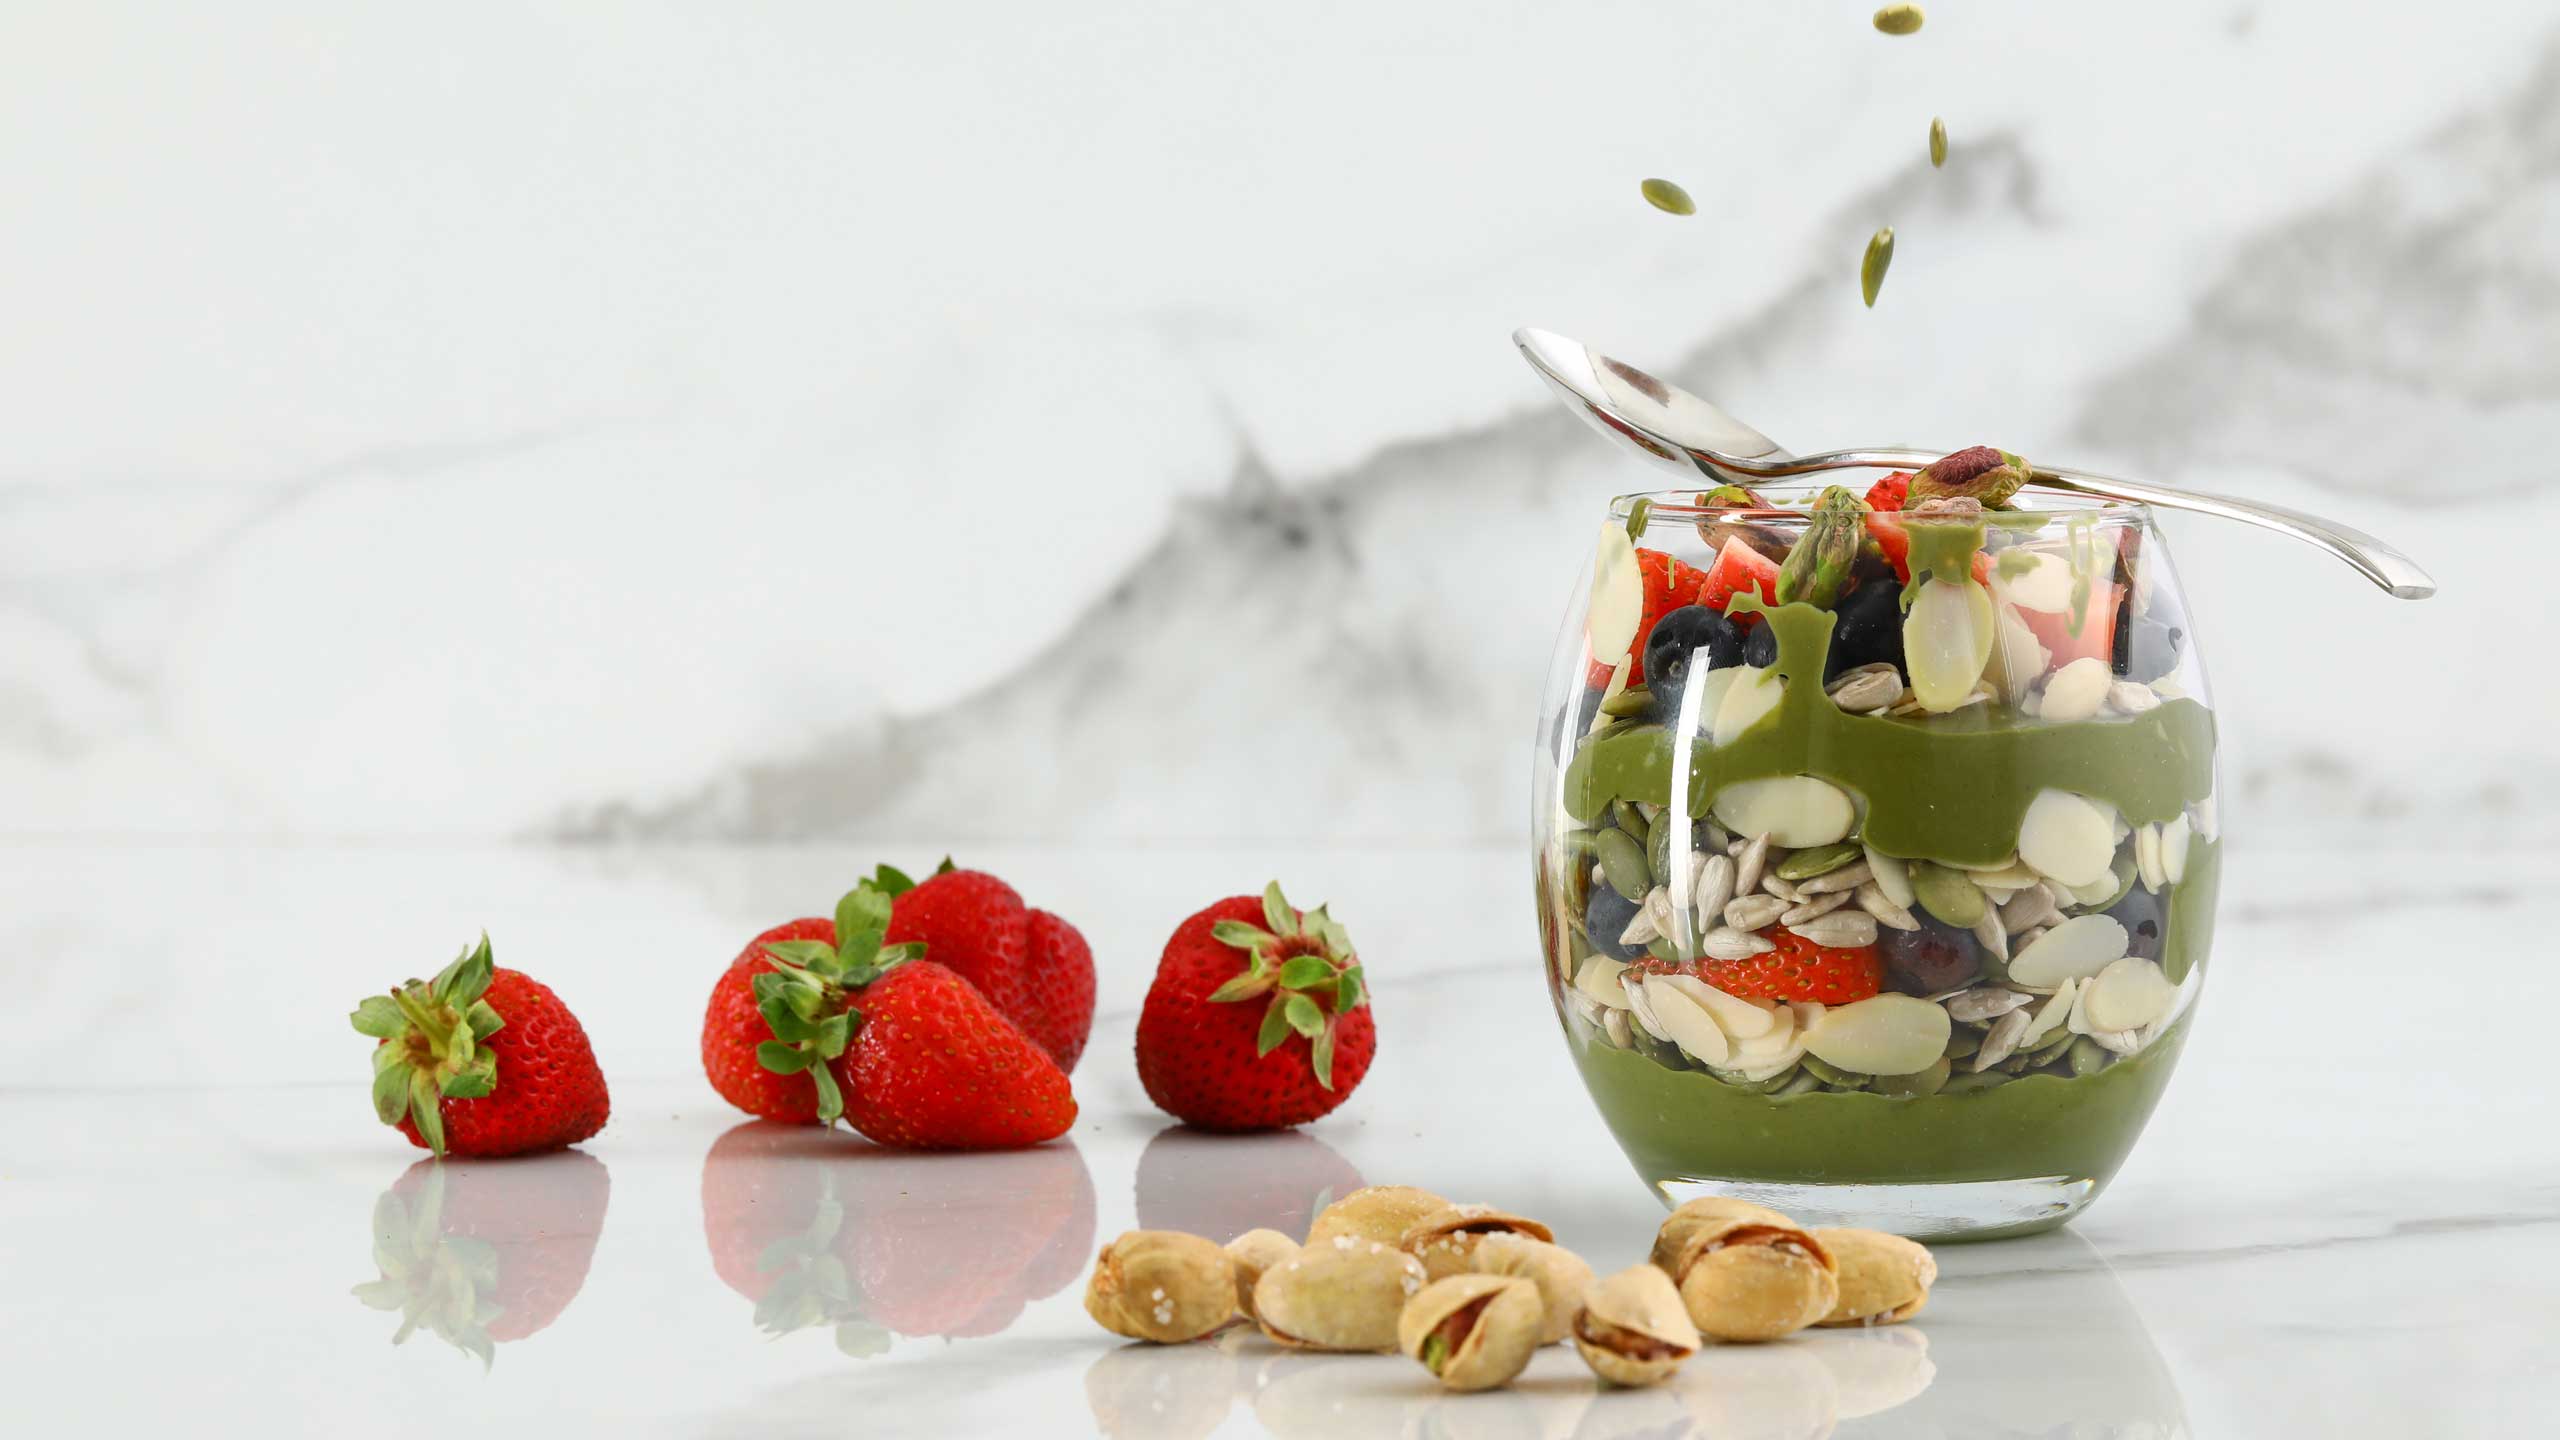 pistachio-spread-with-fruits-and-nuts-home-page